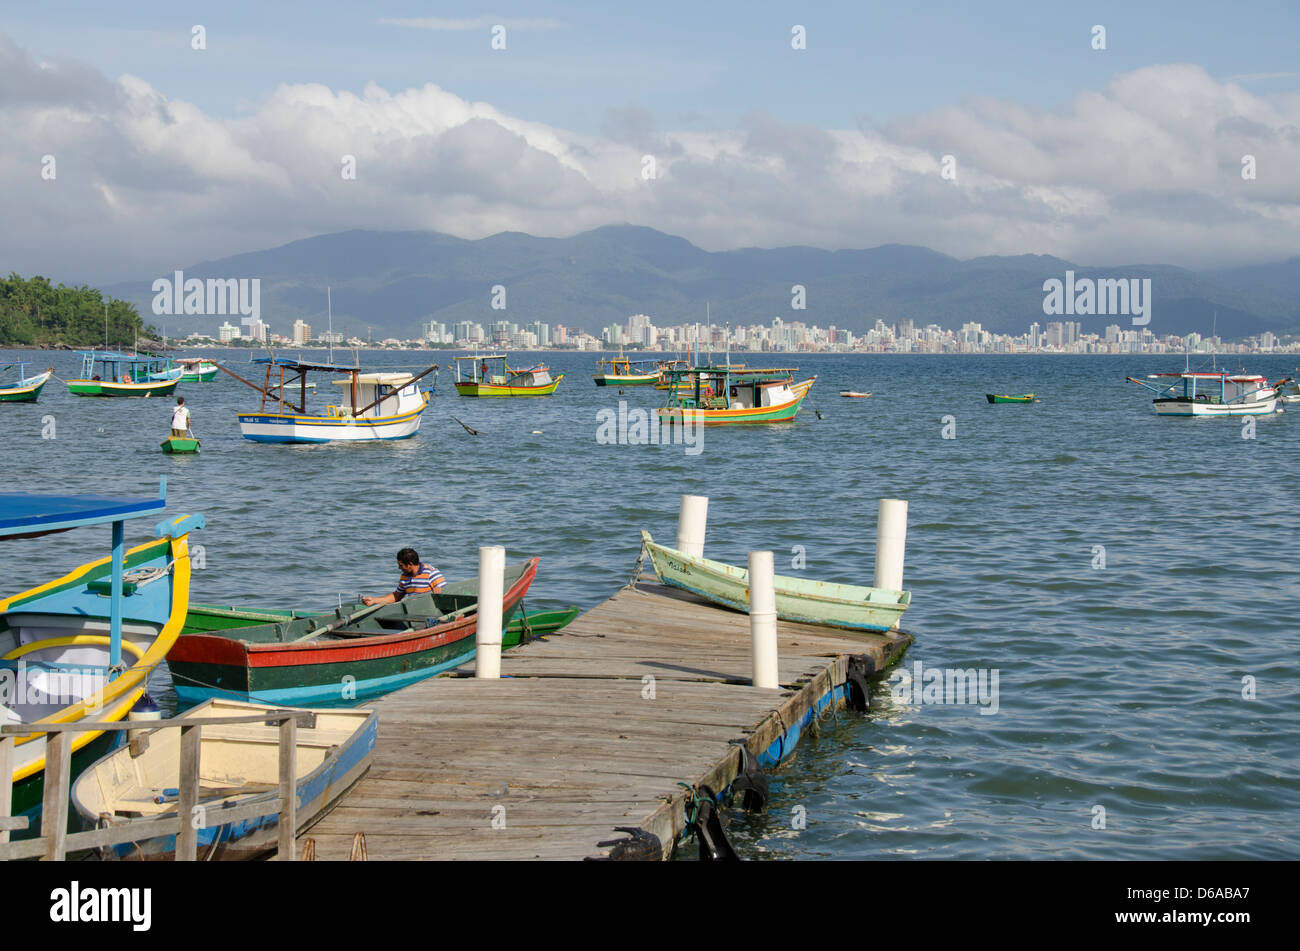 Brazil, state of Santa Catarina, Porto Belo. Colorful local fishing boats with city skyline in distance. Stock Photo